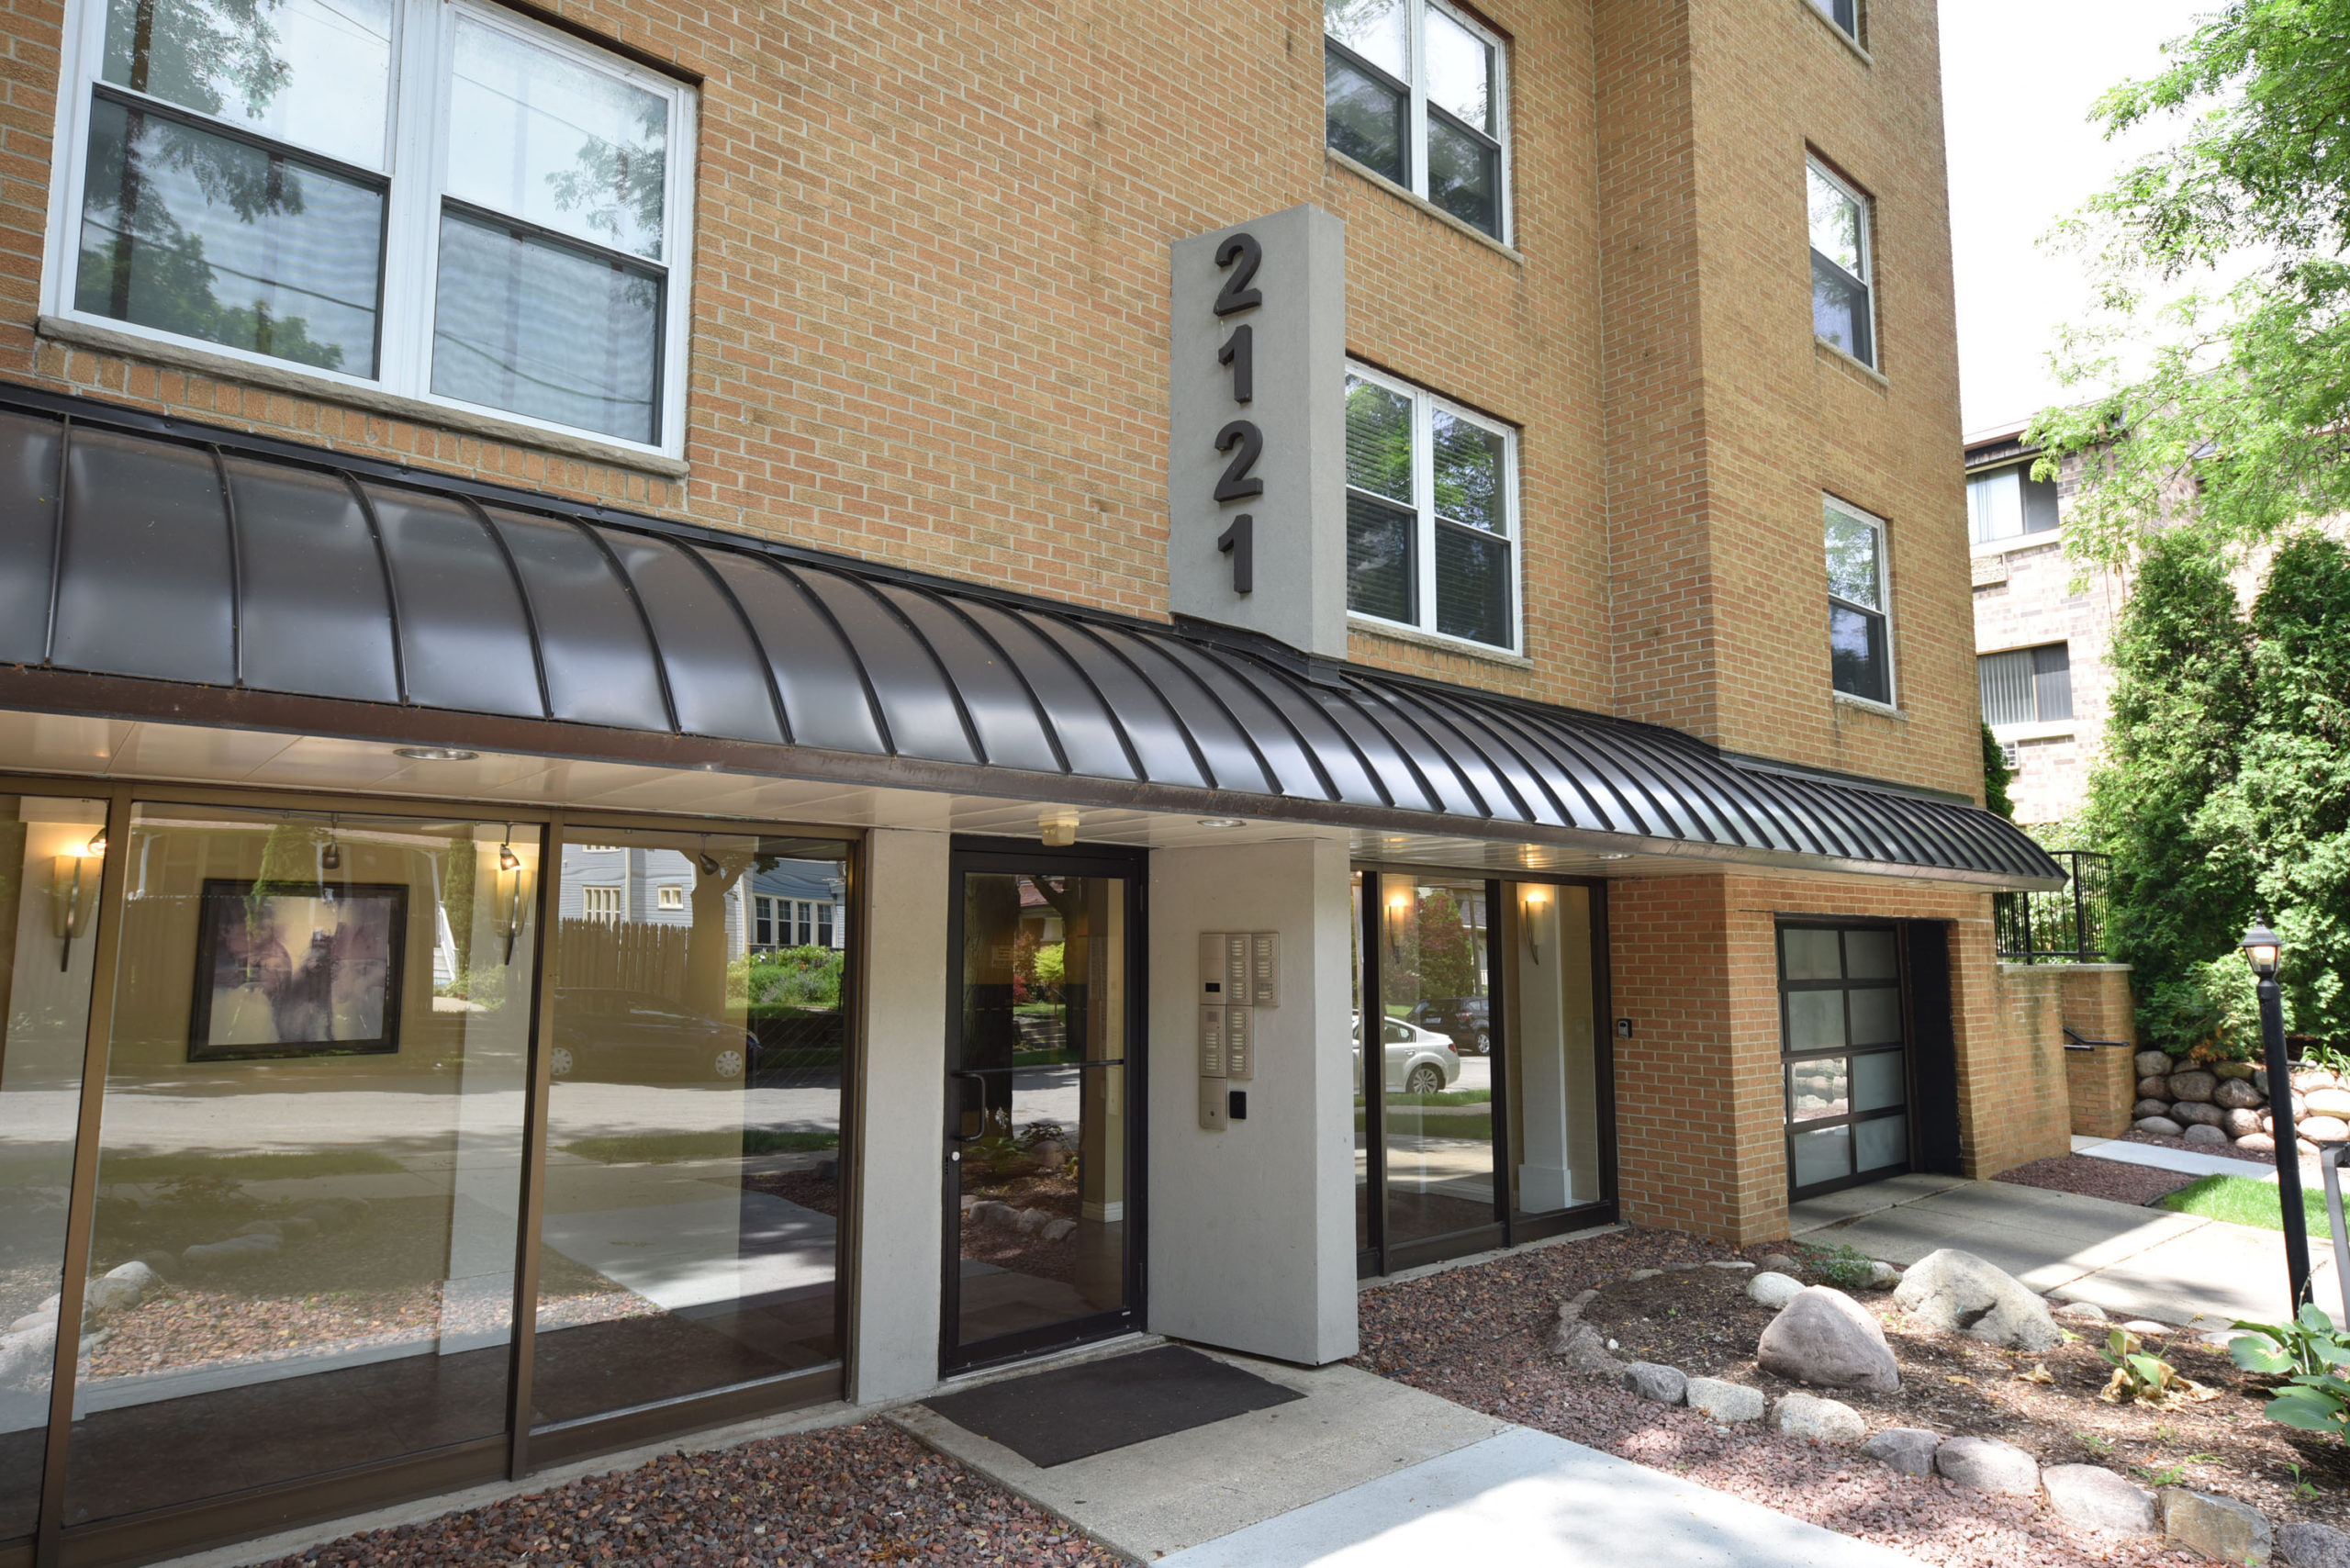  Home for Sale - 2121 N. Cambridge Ave., #210 Milwaukee, WI 53202-1064